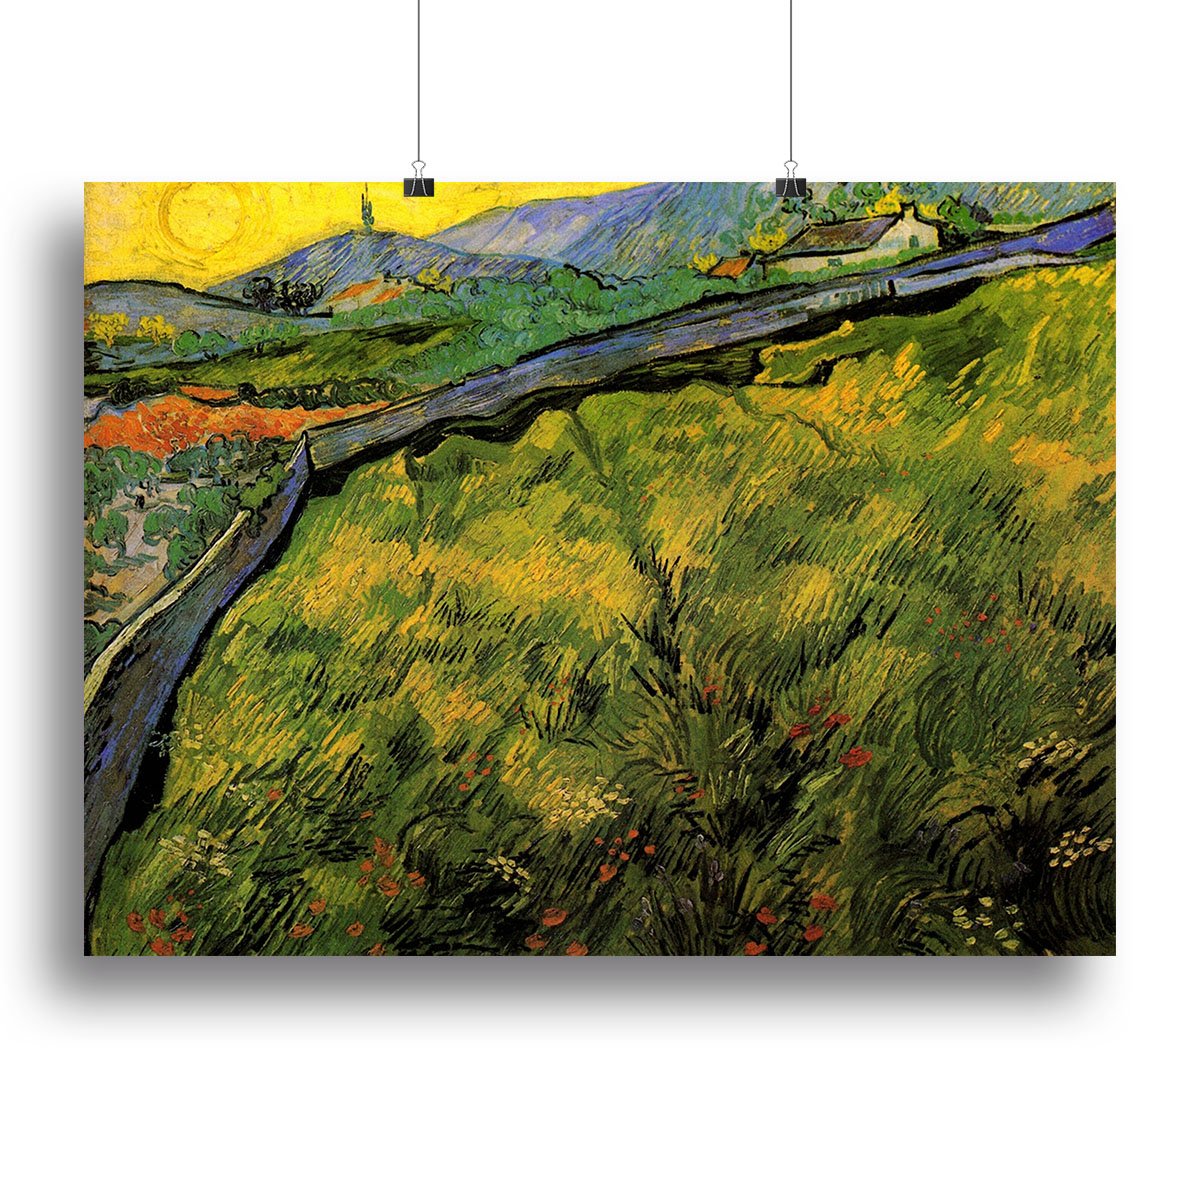 Field of Spring Wheat at Sunrise by Van Gogh Canvas Print or Poster